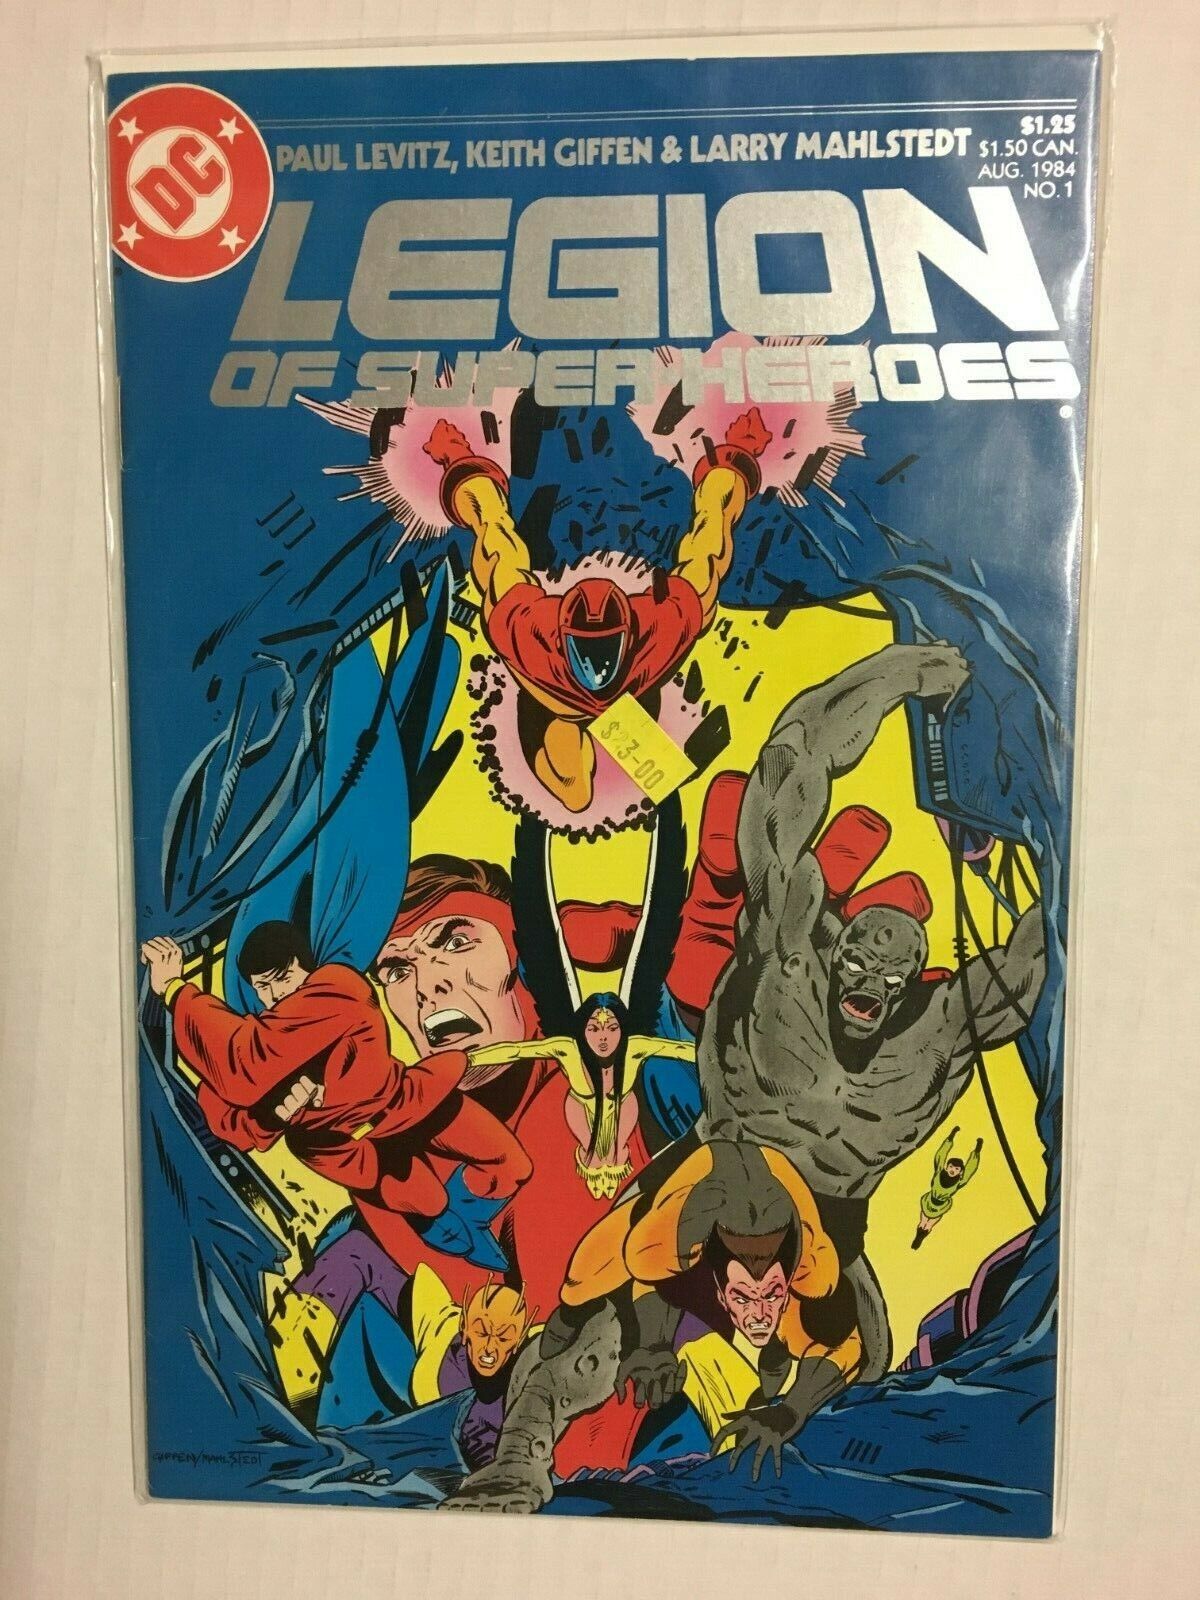 Legion of Super-Heroes Issue #1 DC Comics (August 1984) NM Boarded & Bagged